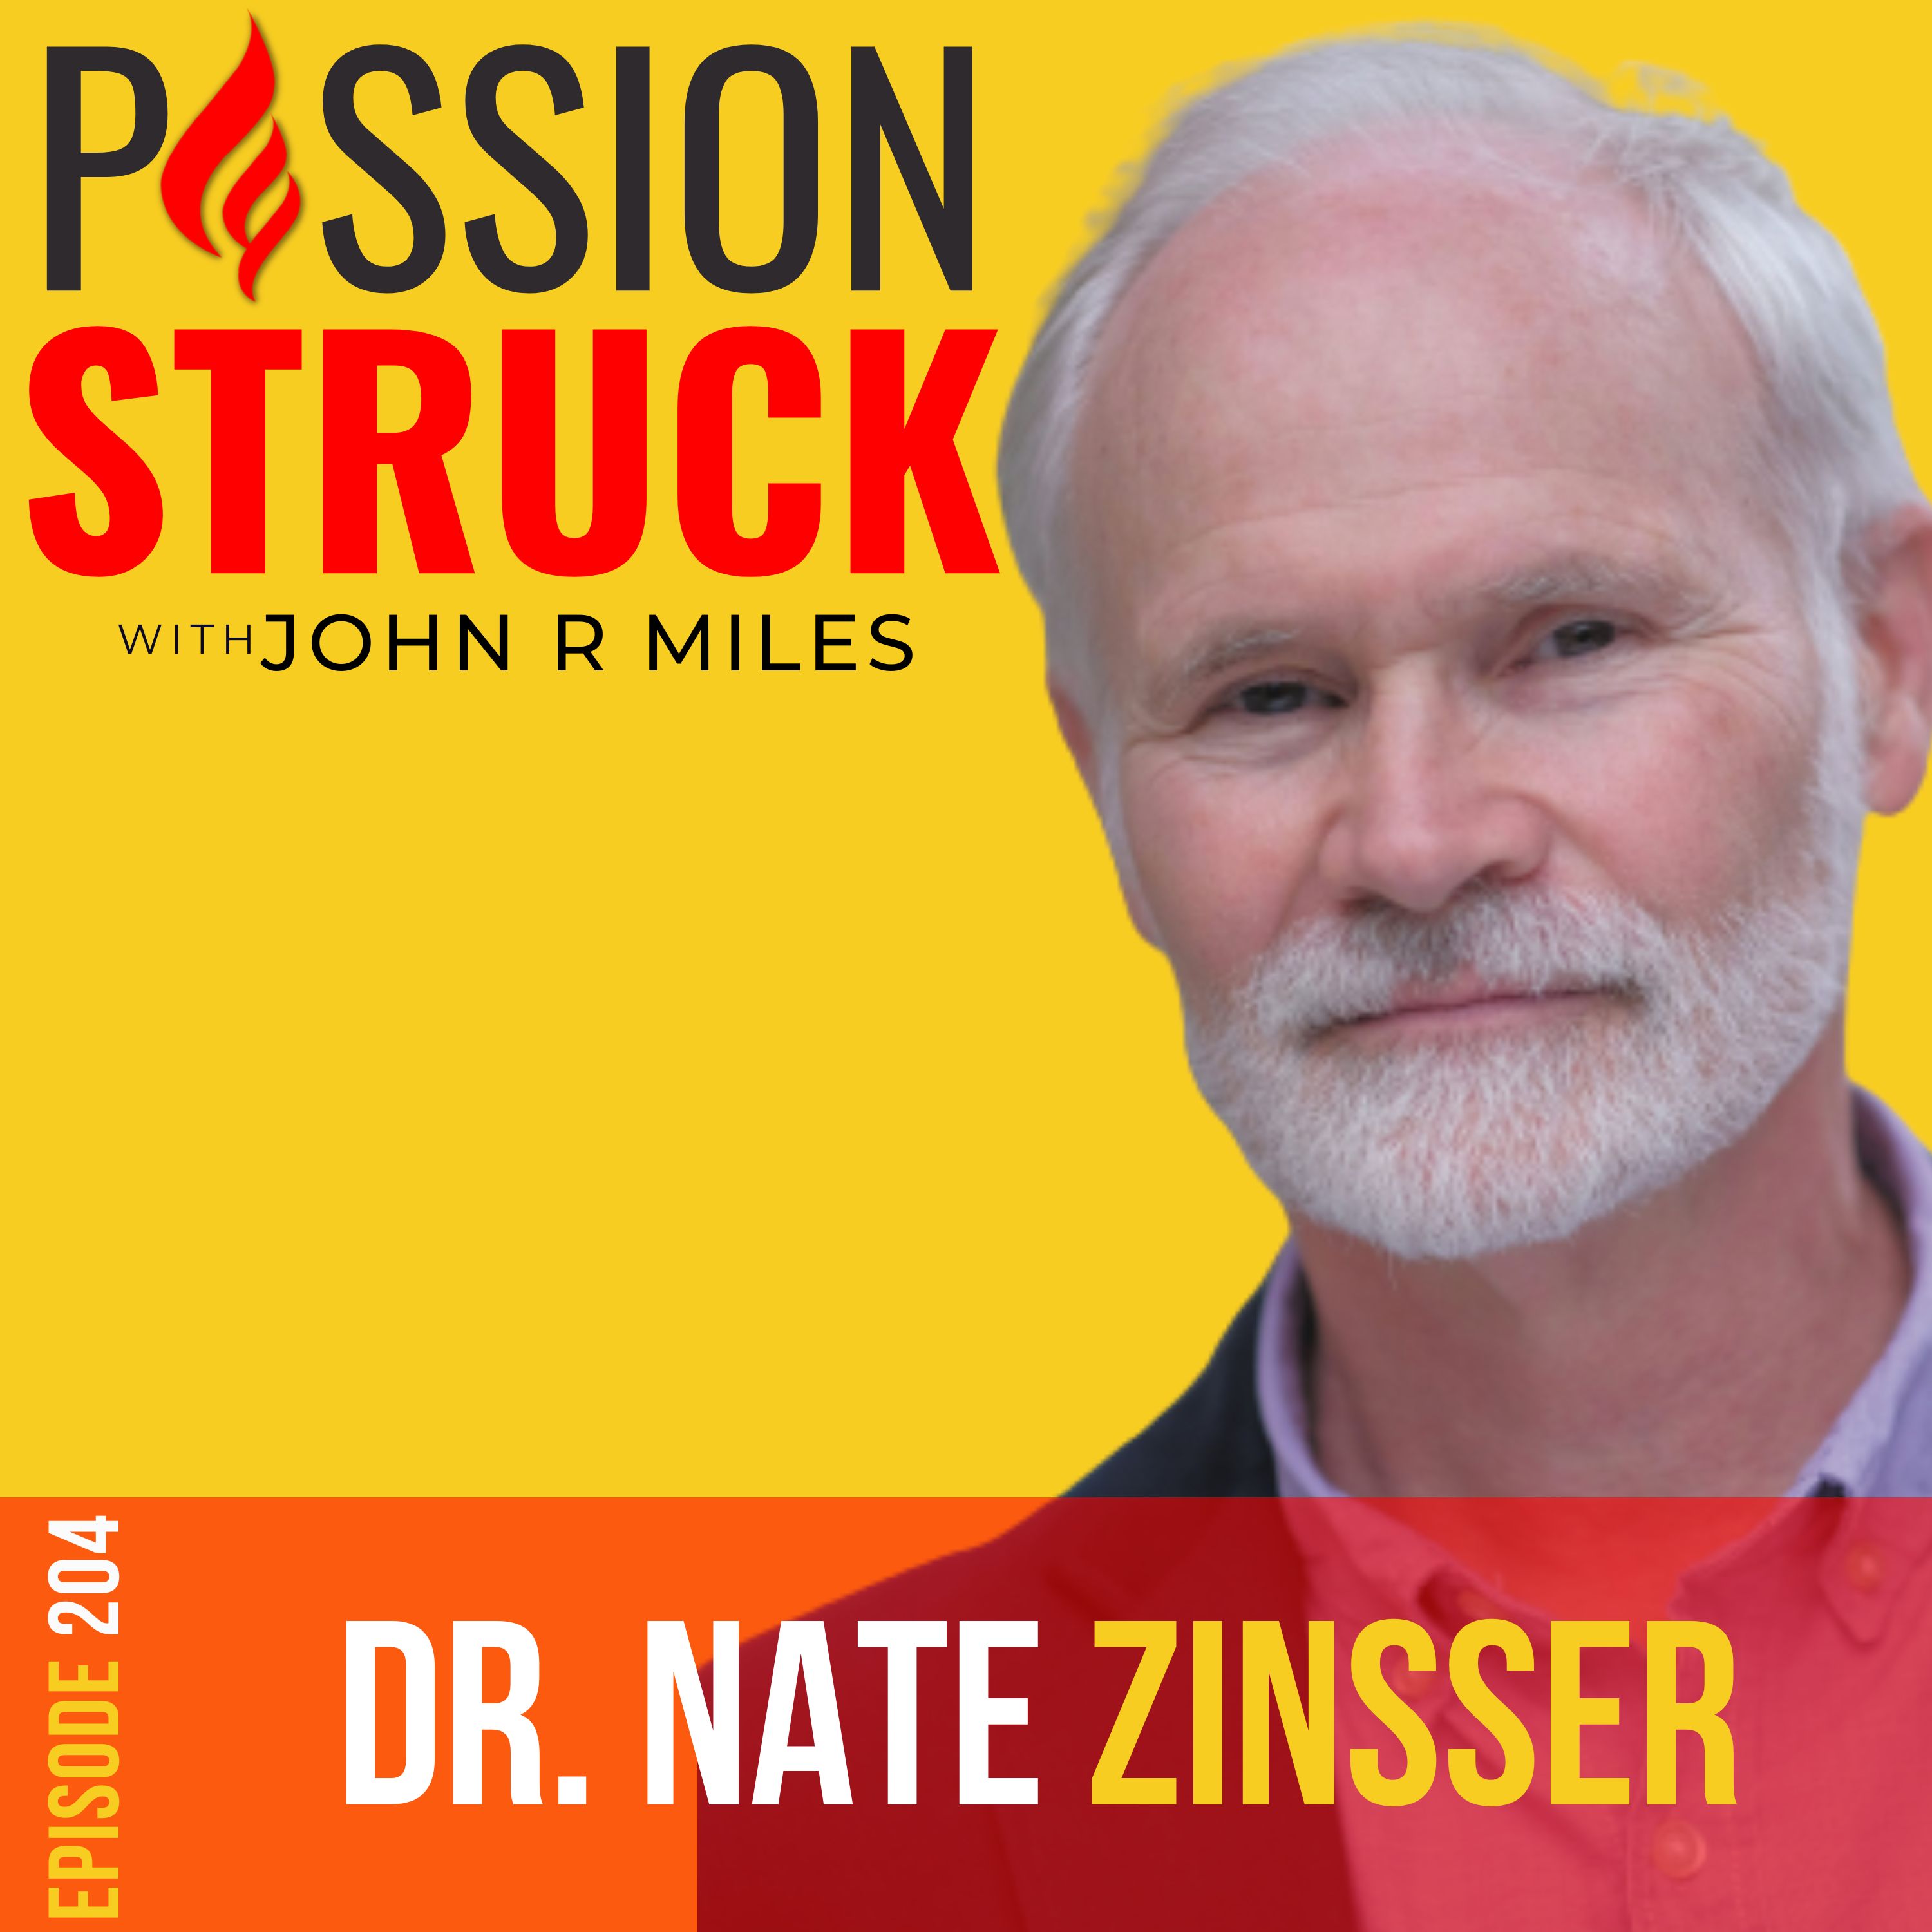 Passion Struck podcast album cover episode 204 with Dr. Nate Zinsser on the confident mind